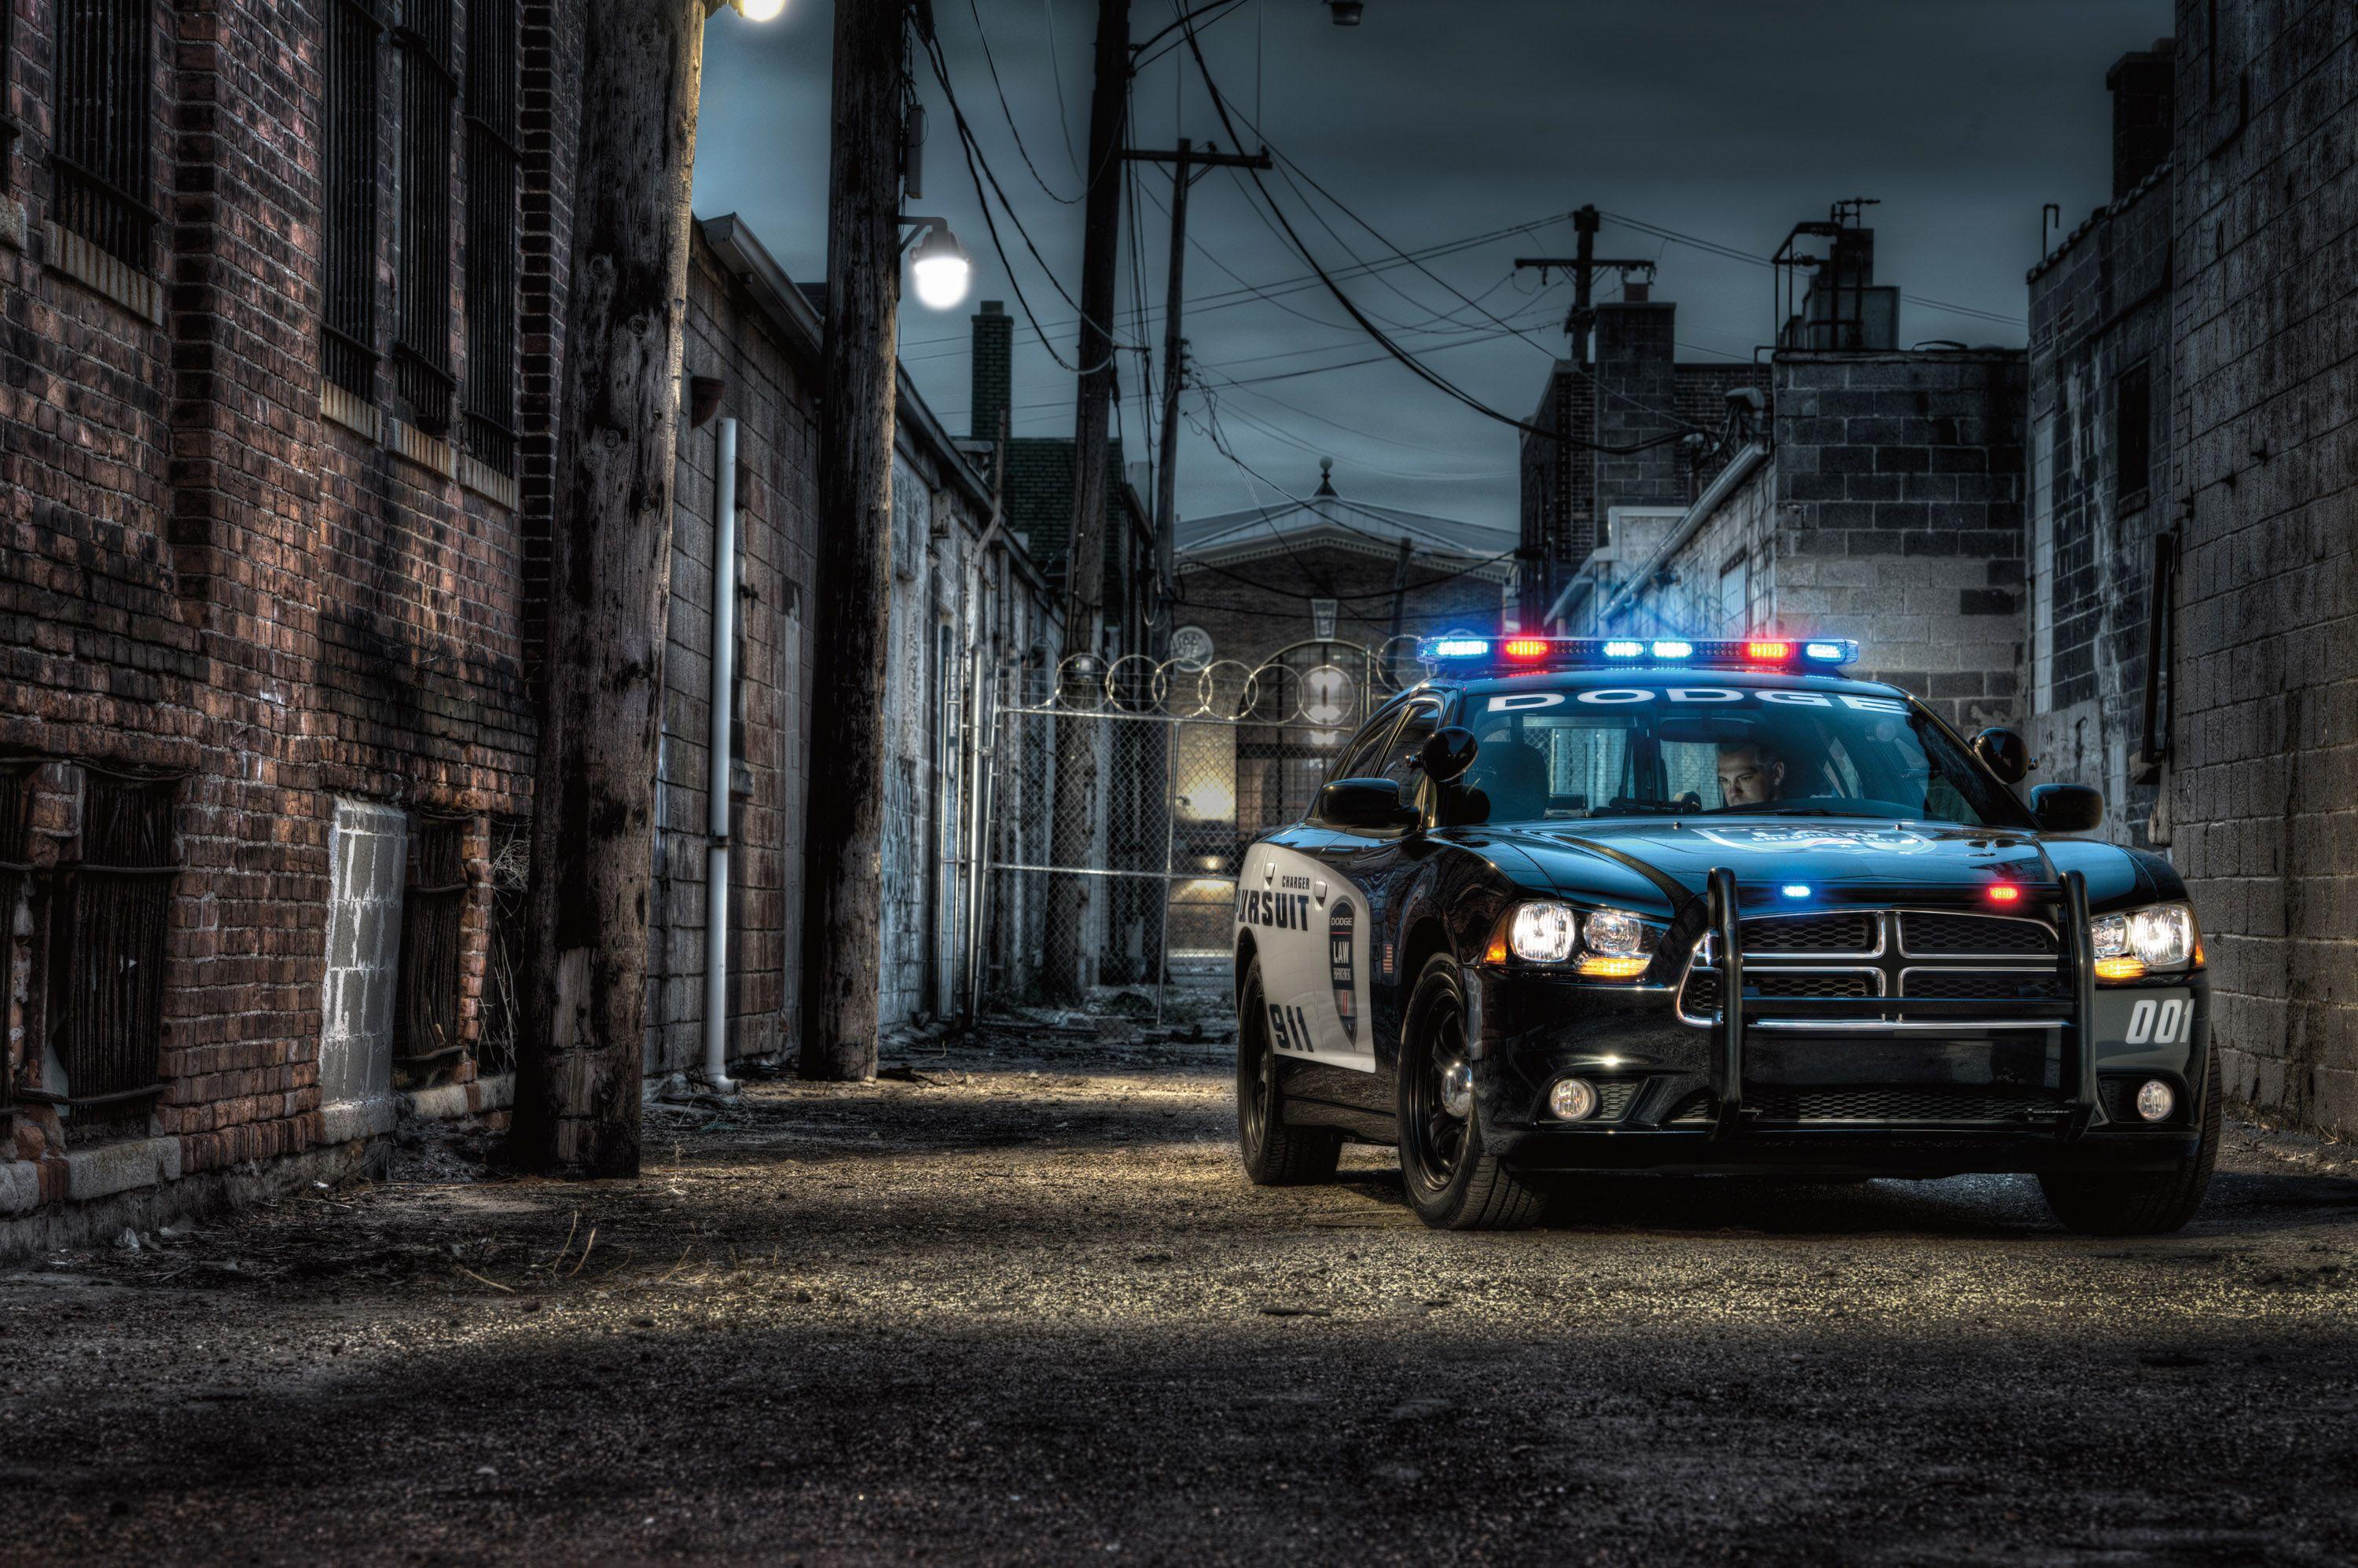 Police Wallpaper Free Police Background